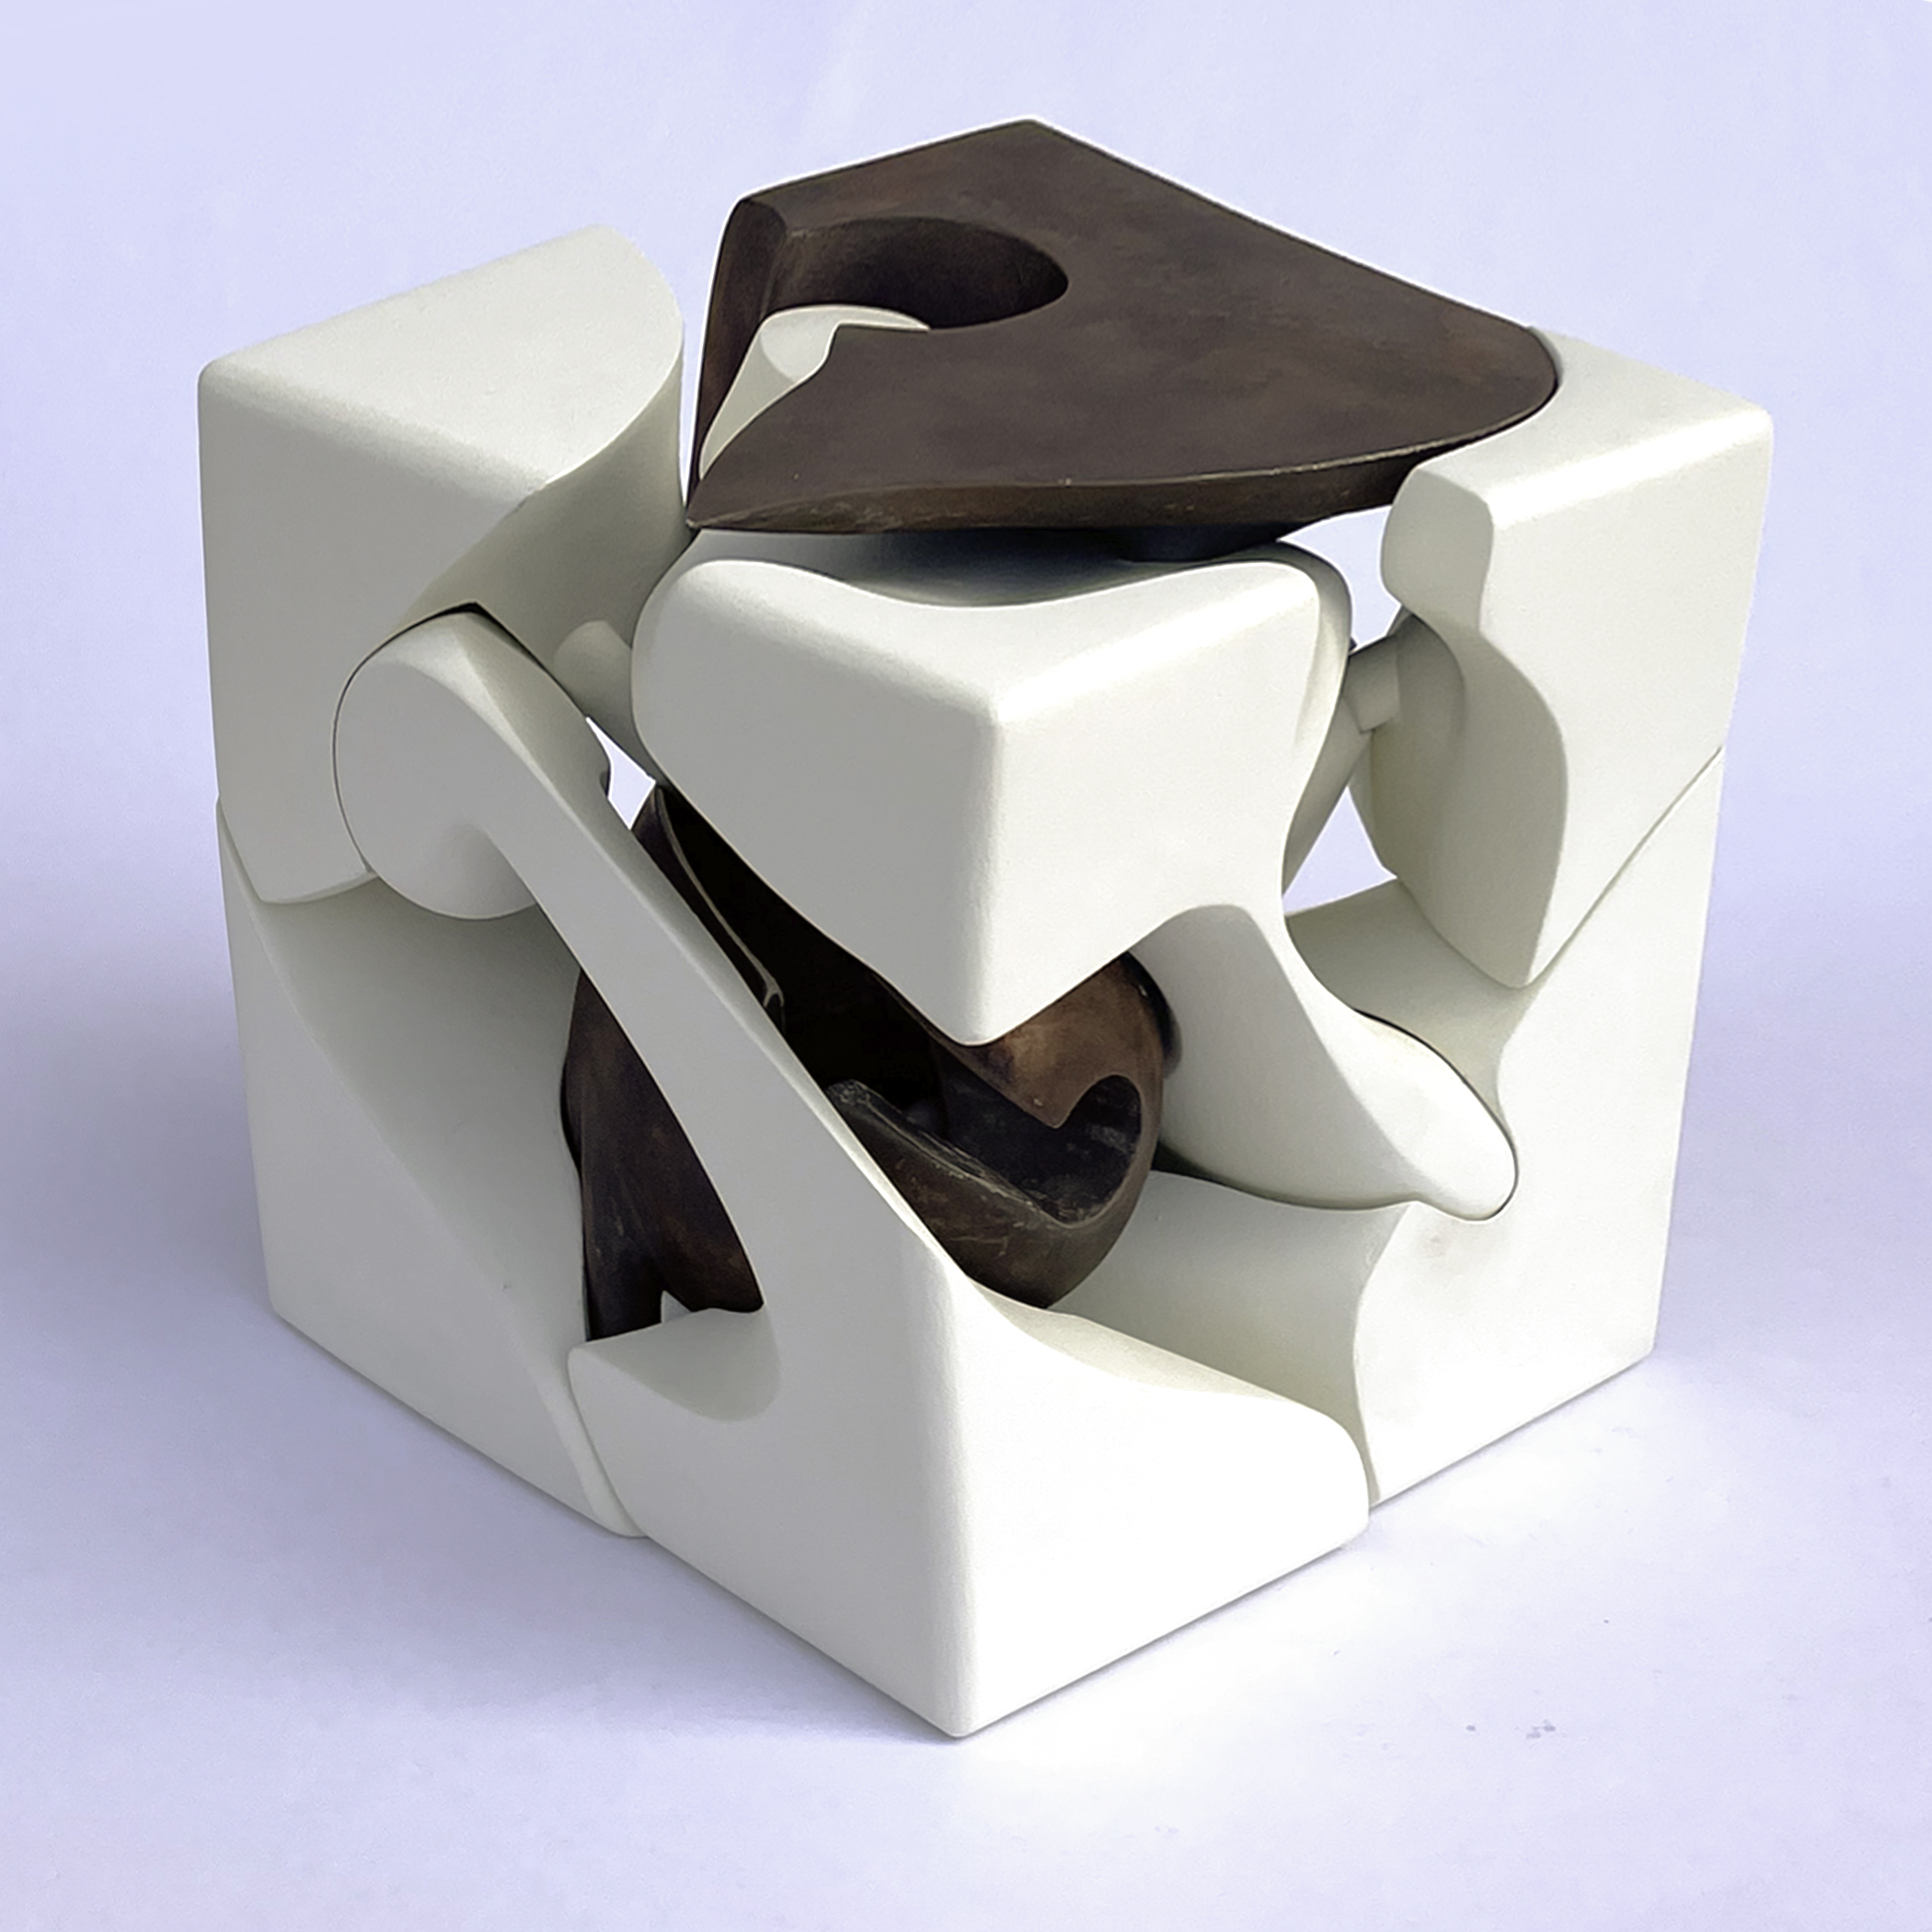 A complex 3D puzzle comprised of large geometric white and brown pieces.